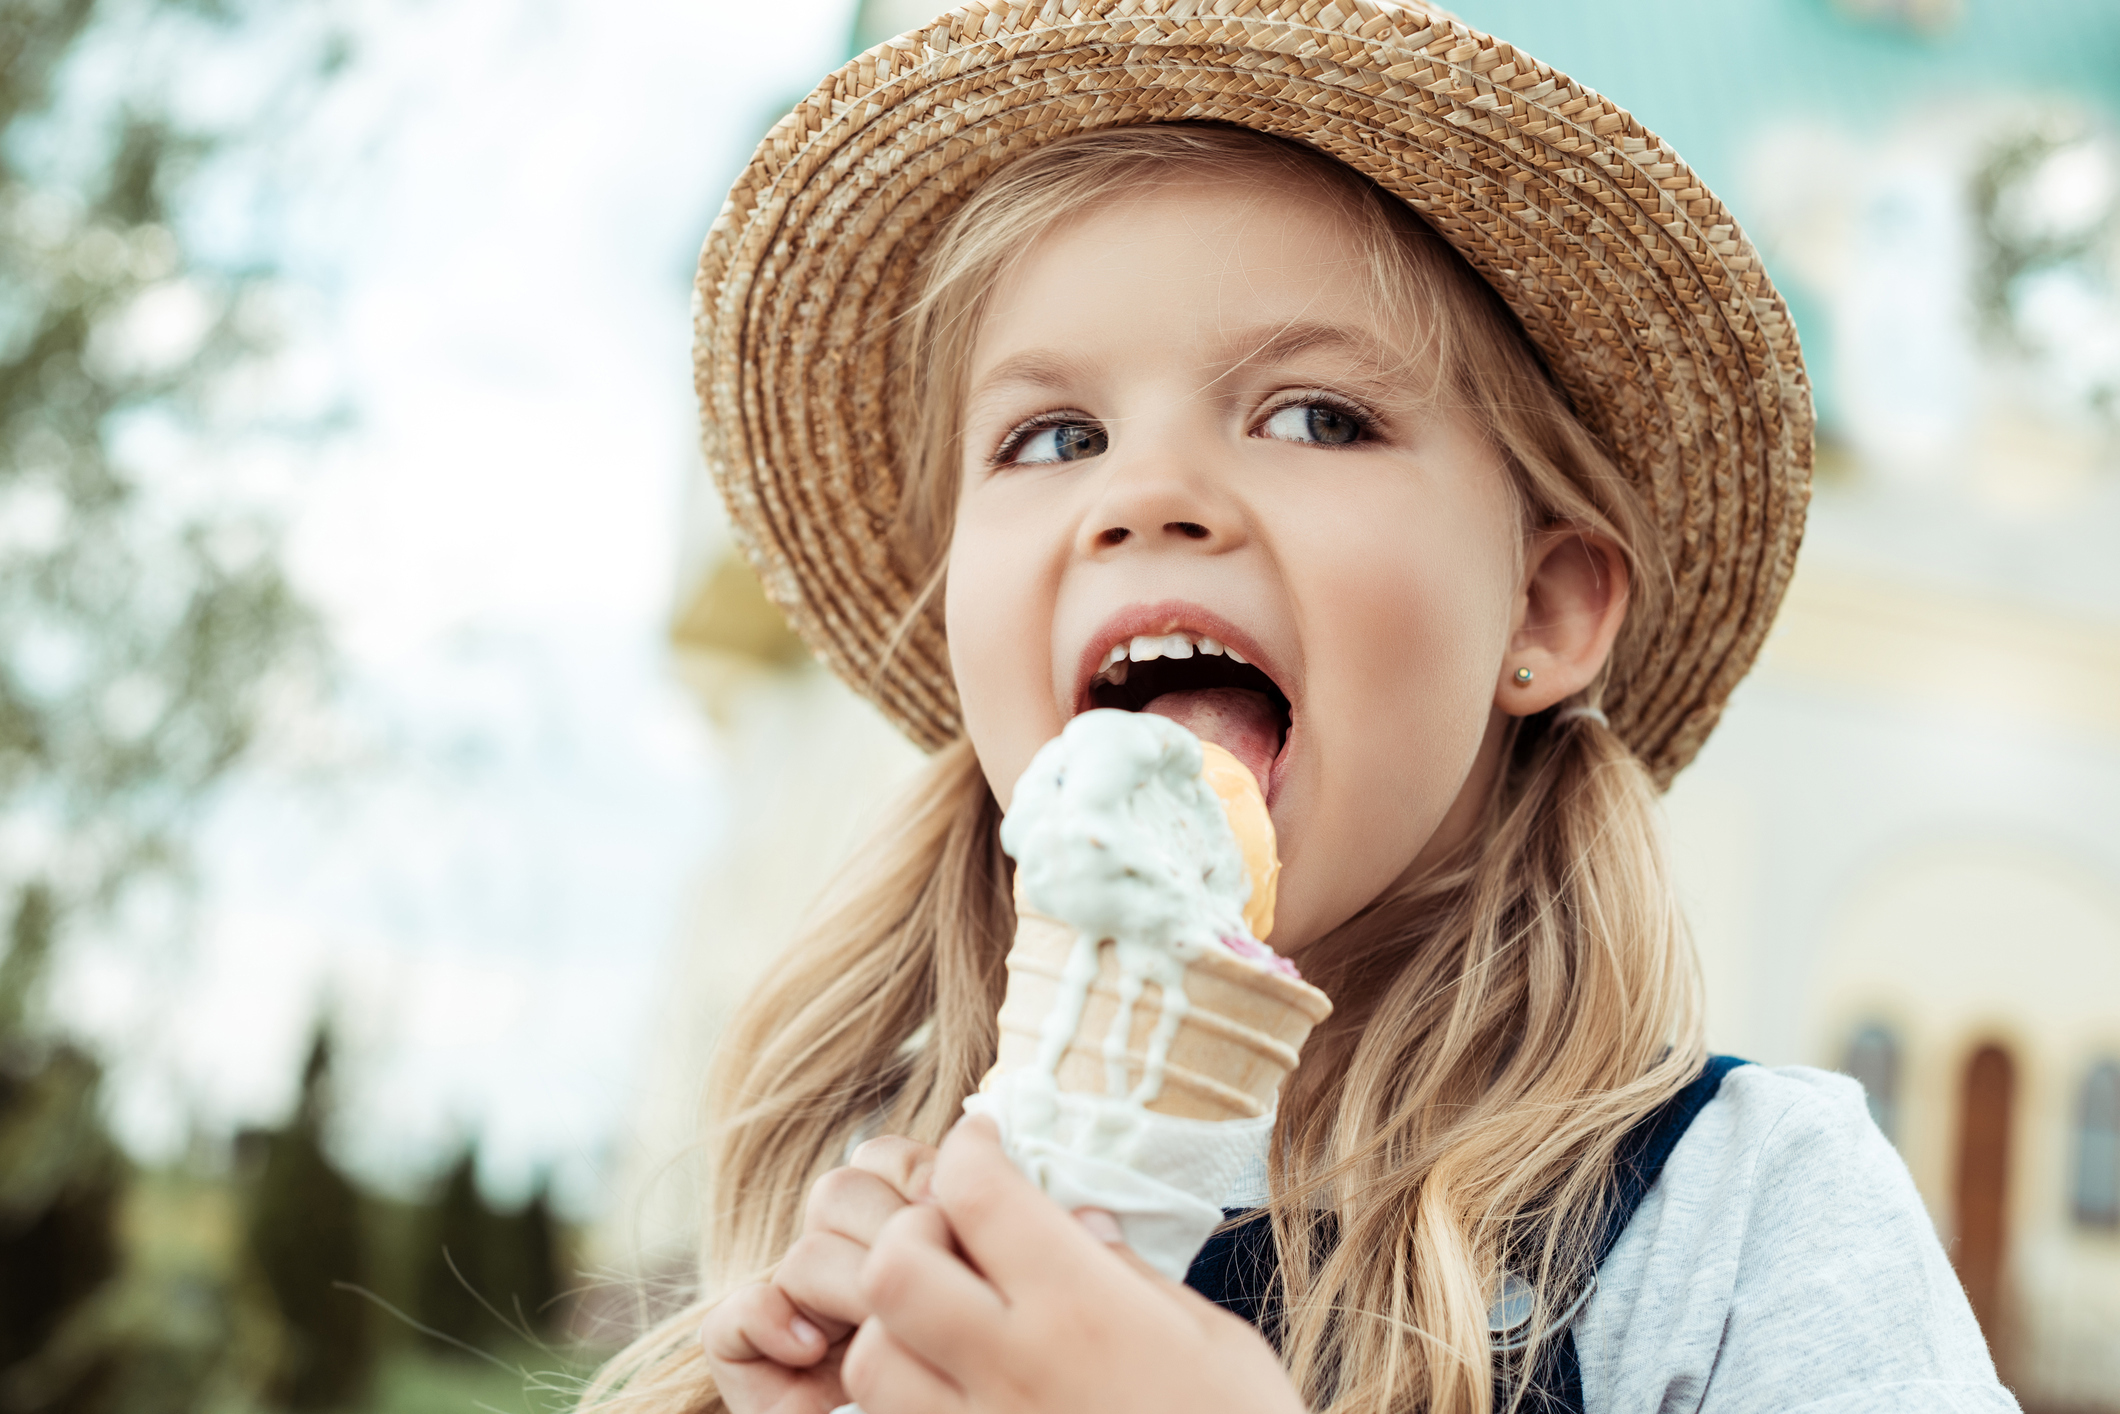 Get your ice cream favourites at the Hillside Beach Eatery and Store cool treat parlour.